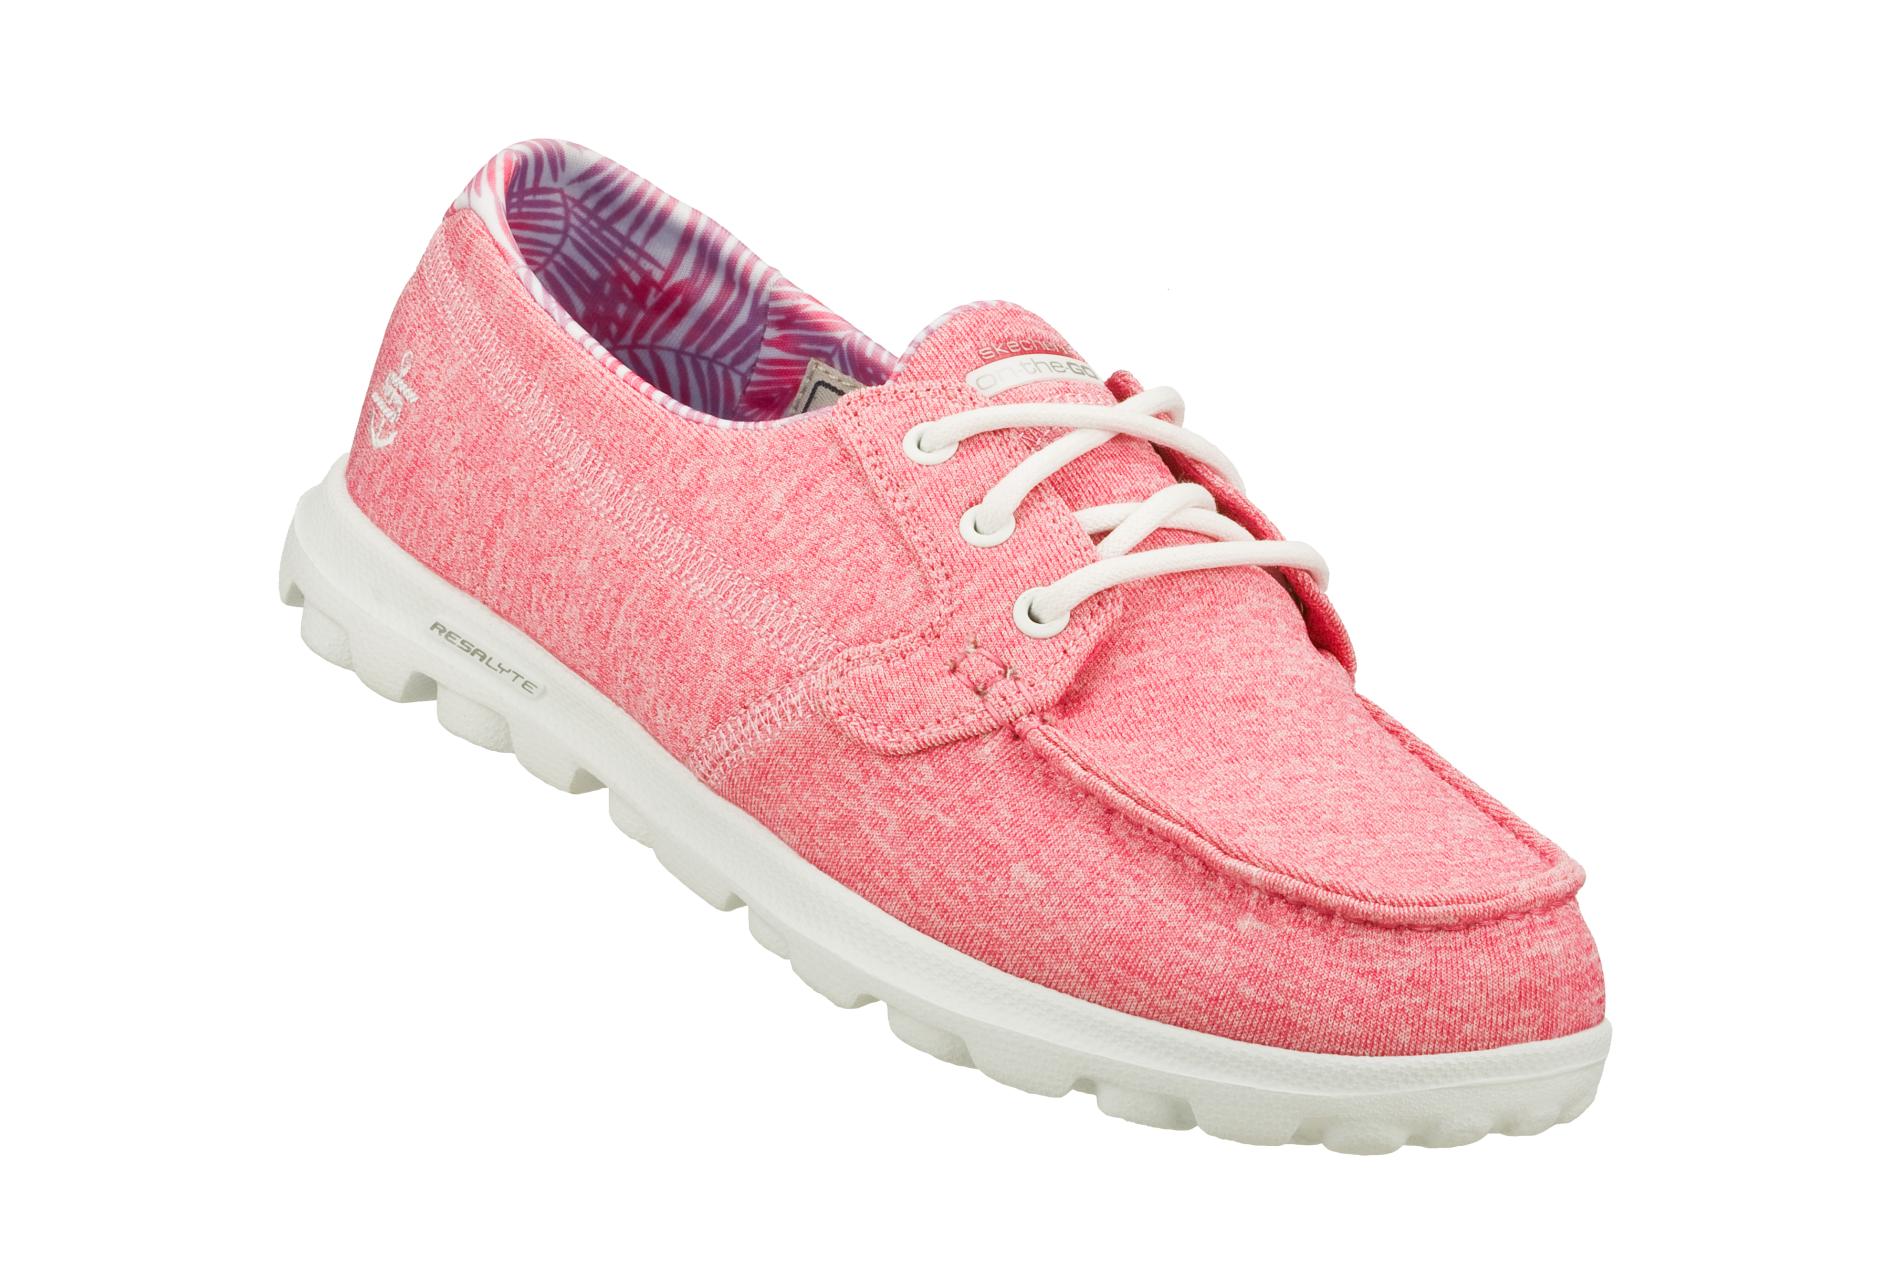 Skechers Women's On the Go Flagship Pink Boat Shoe